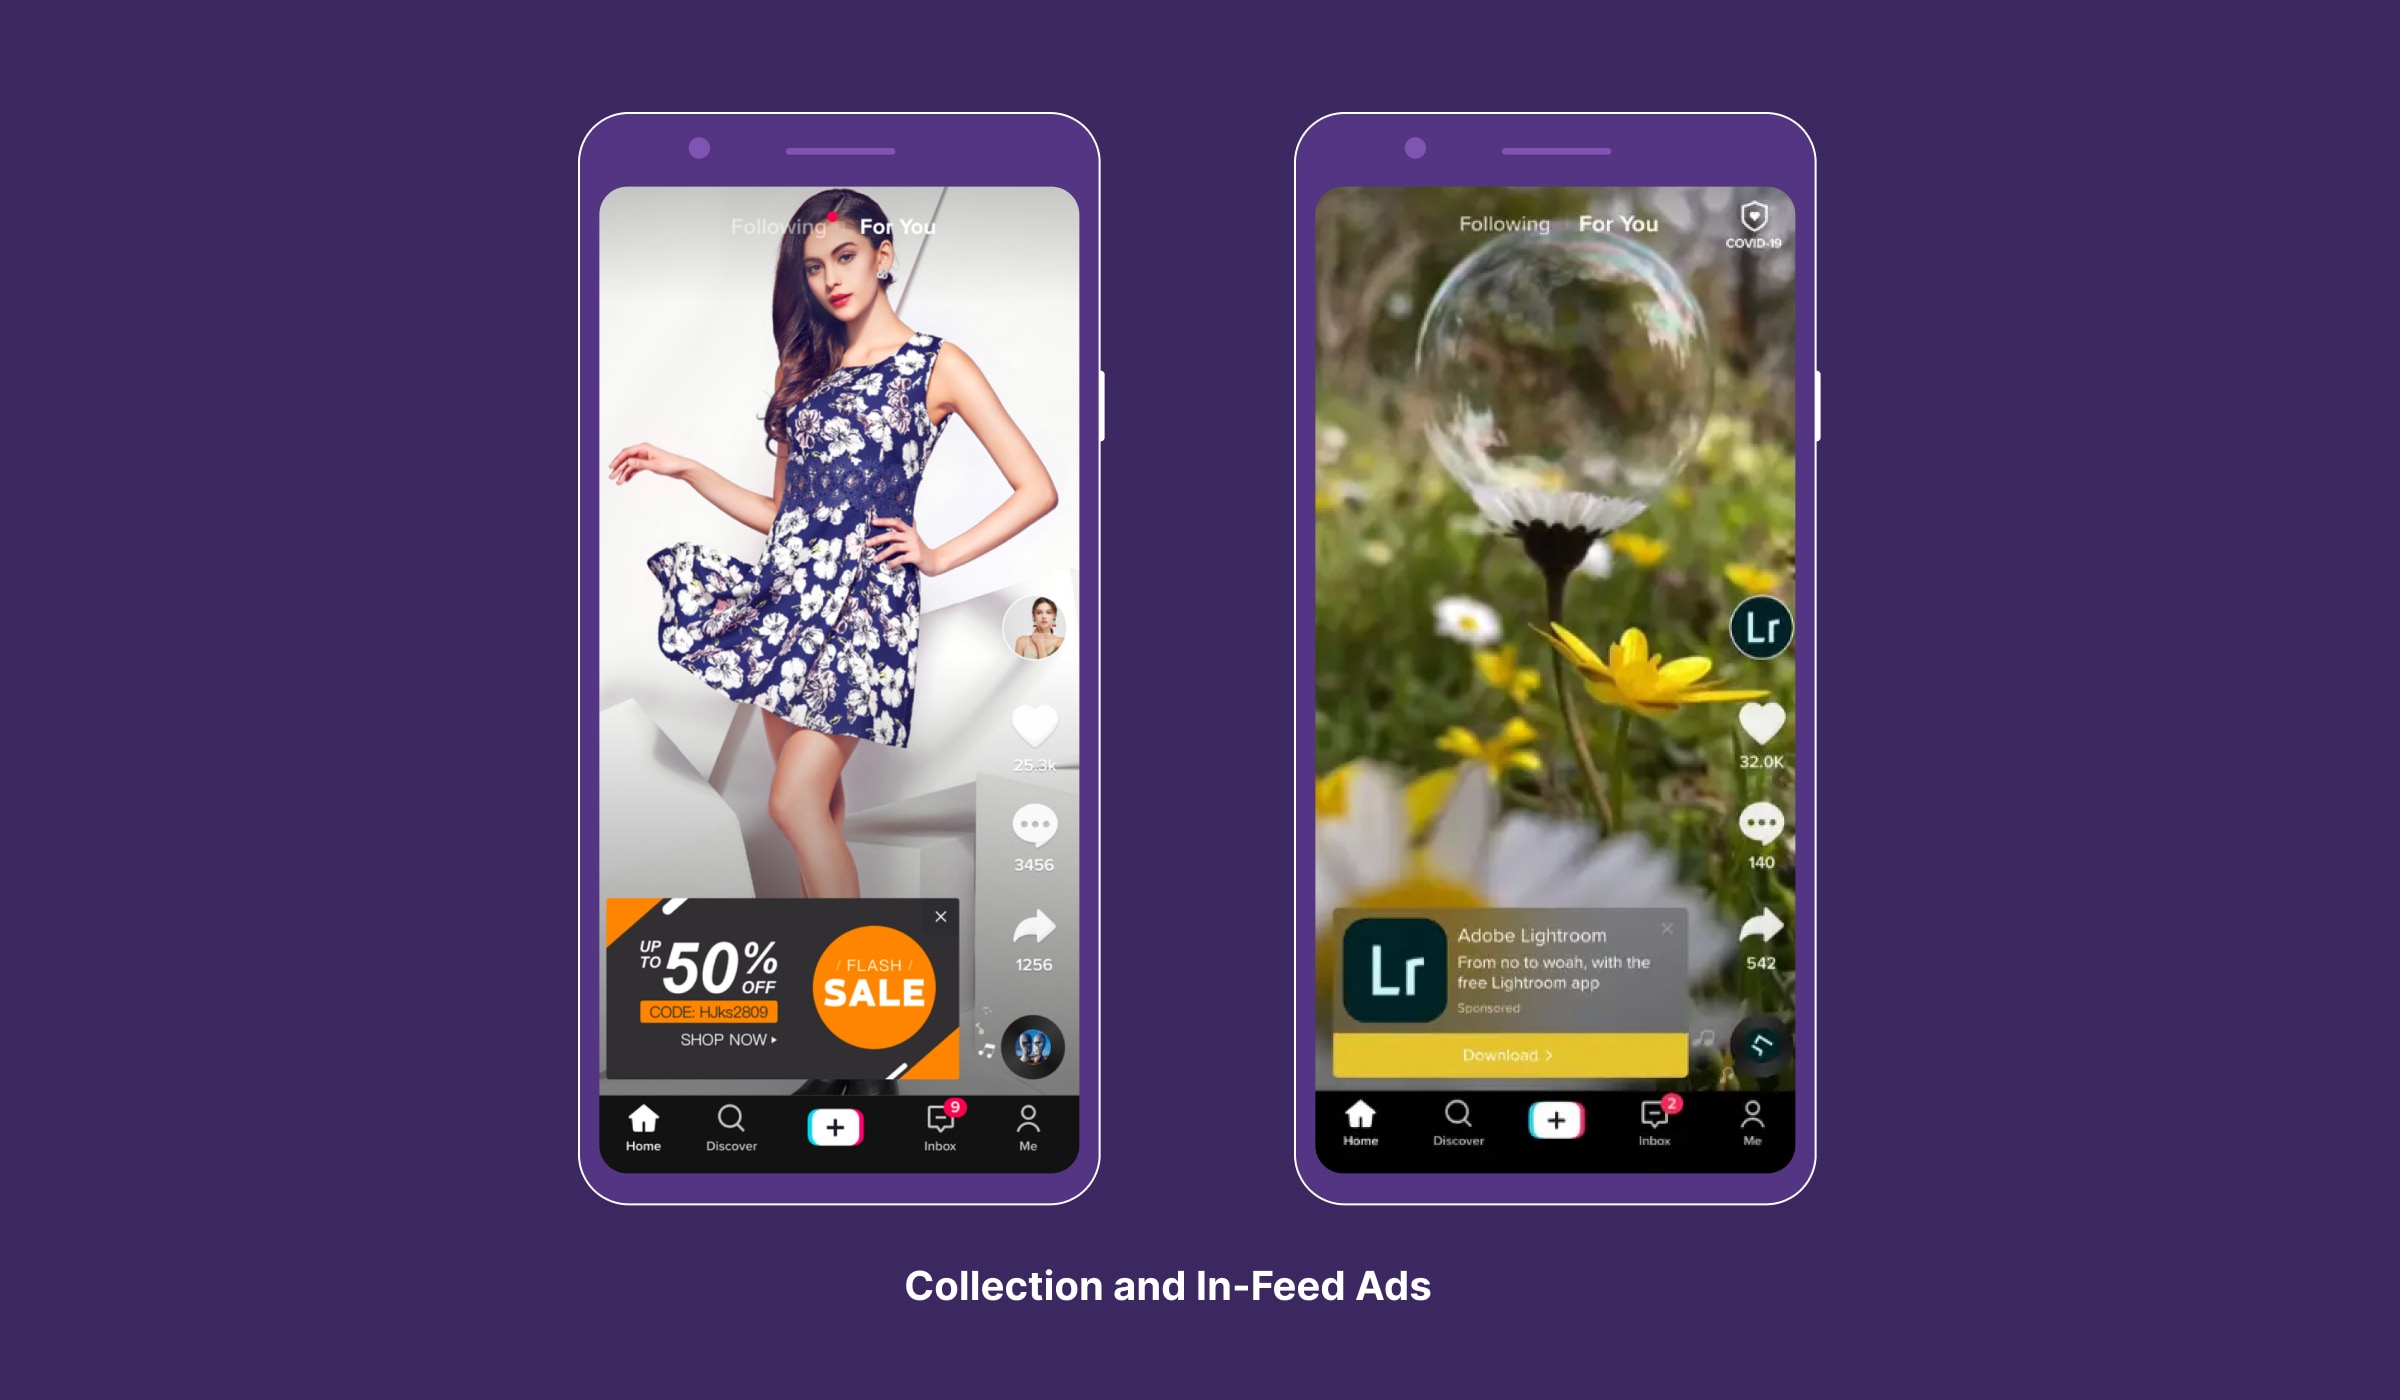 Collection and in-feed ads on TikTok